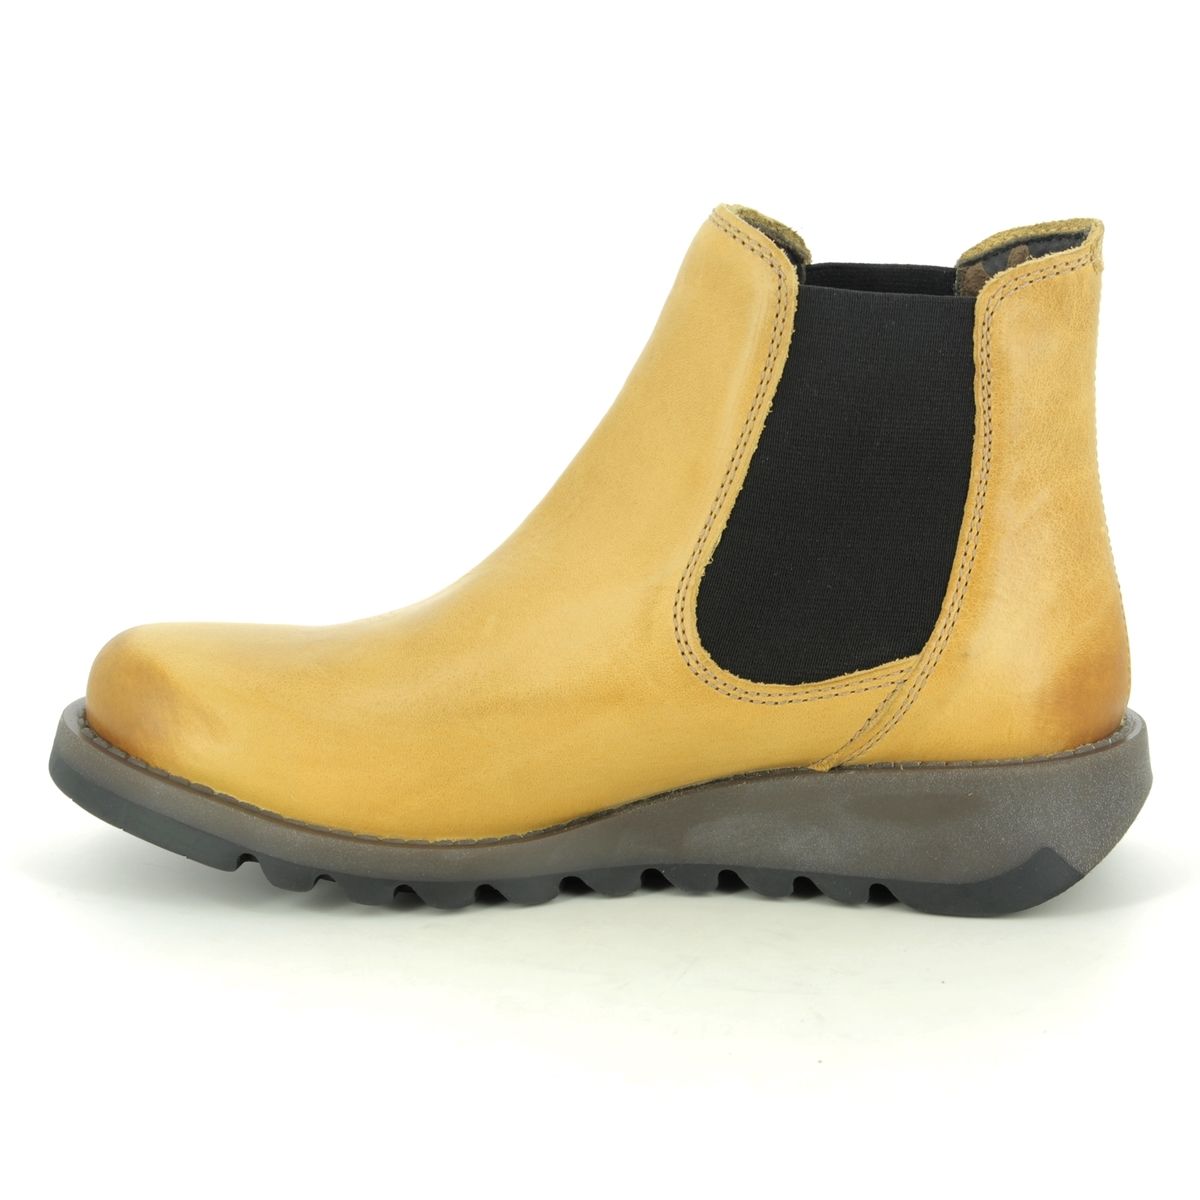 Fly London Salv Yellow Womens Chelsea Boots P143195-034